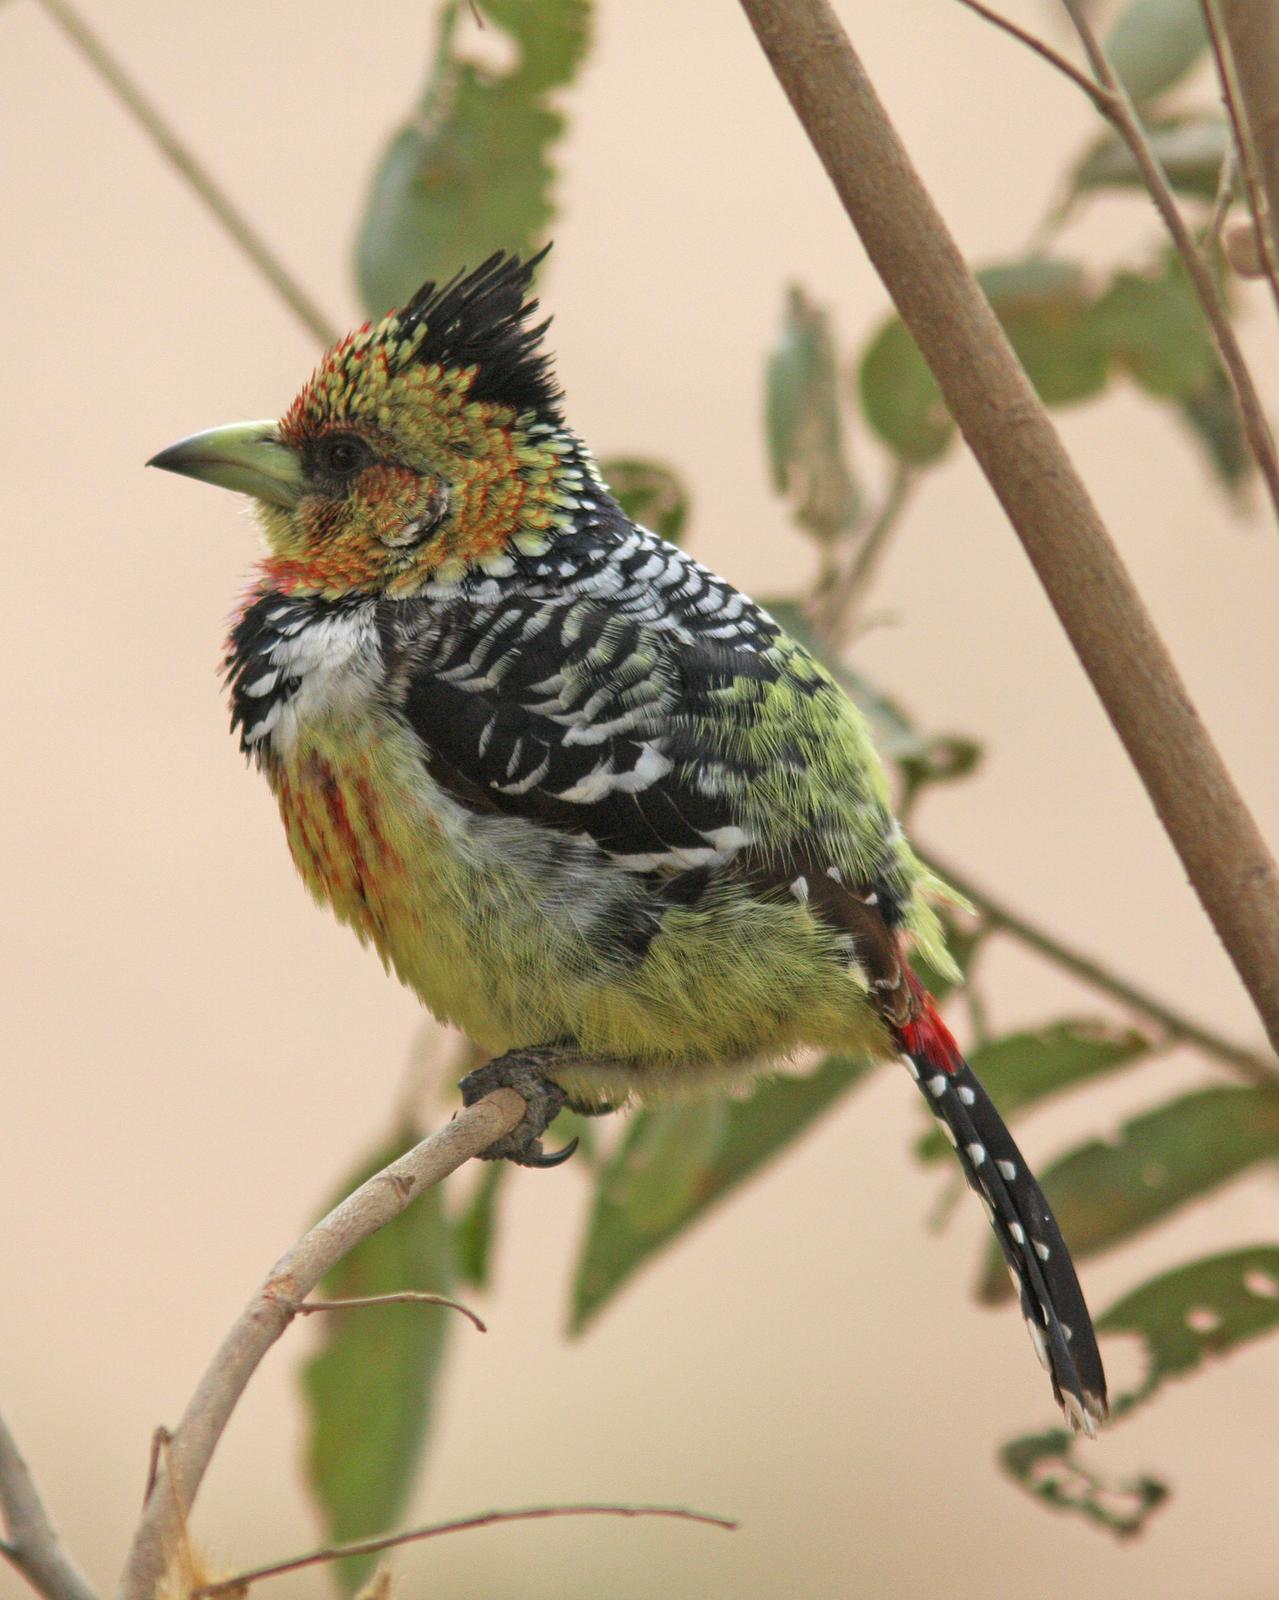 Crested Barbet Photo by Henk Baptist